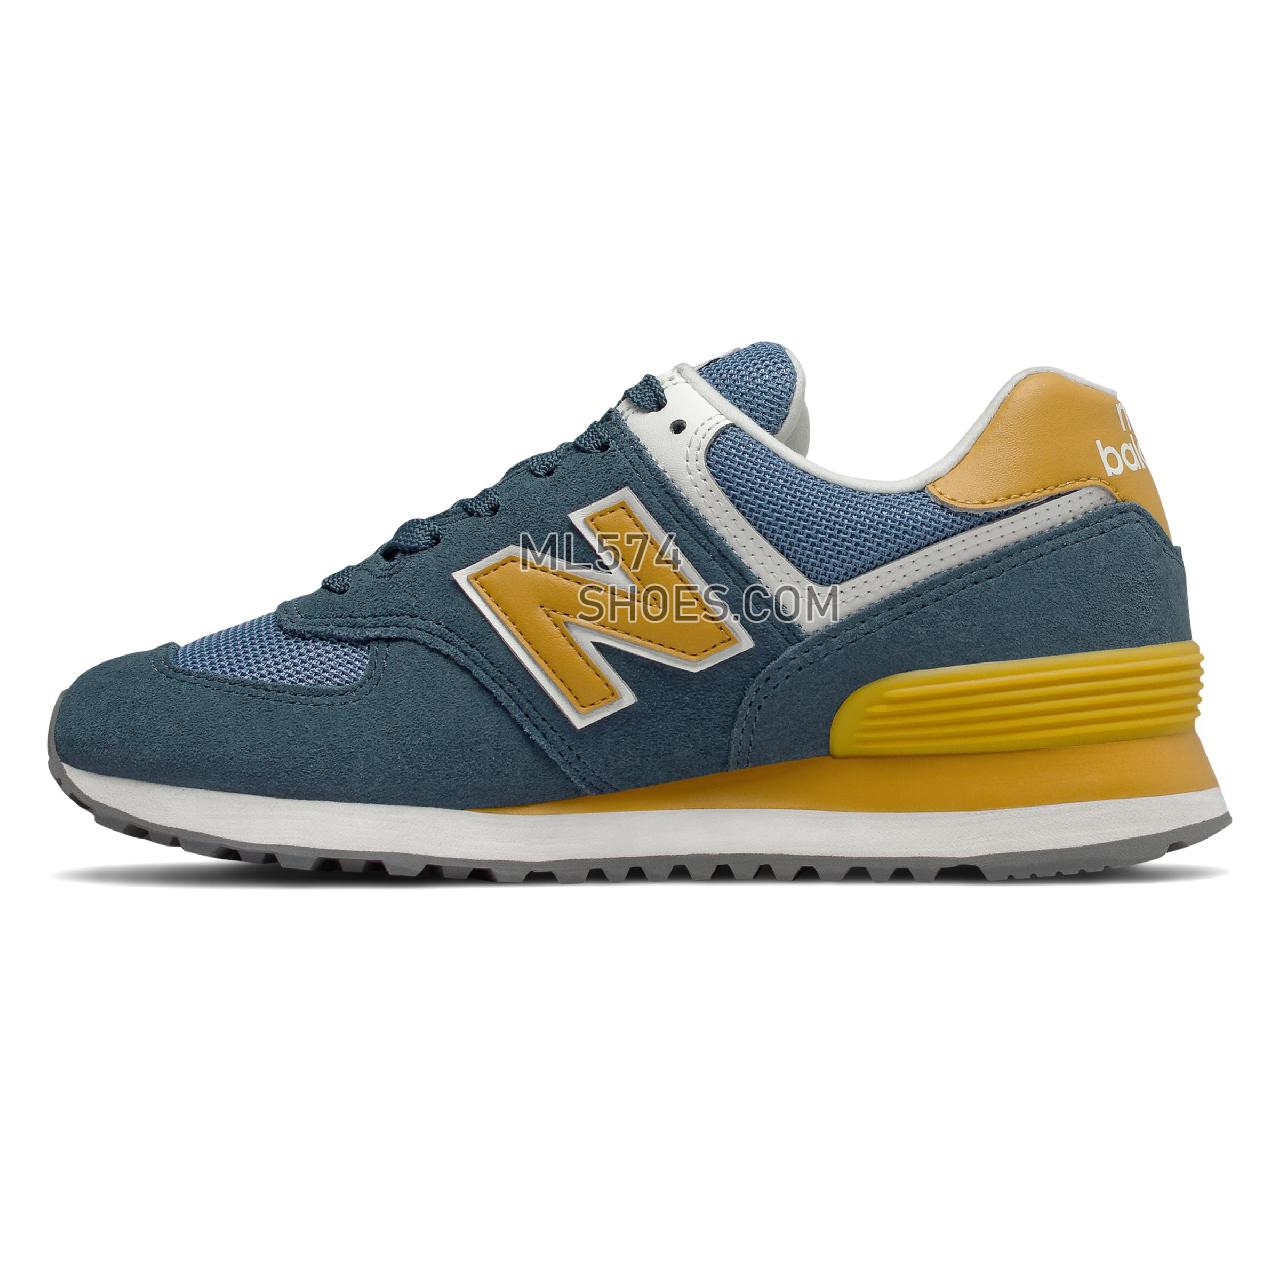 New Balance 574 - Women's Classic Sneakers - Orion Blue with Varsity Gold - WL574LDD